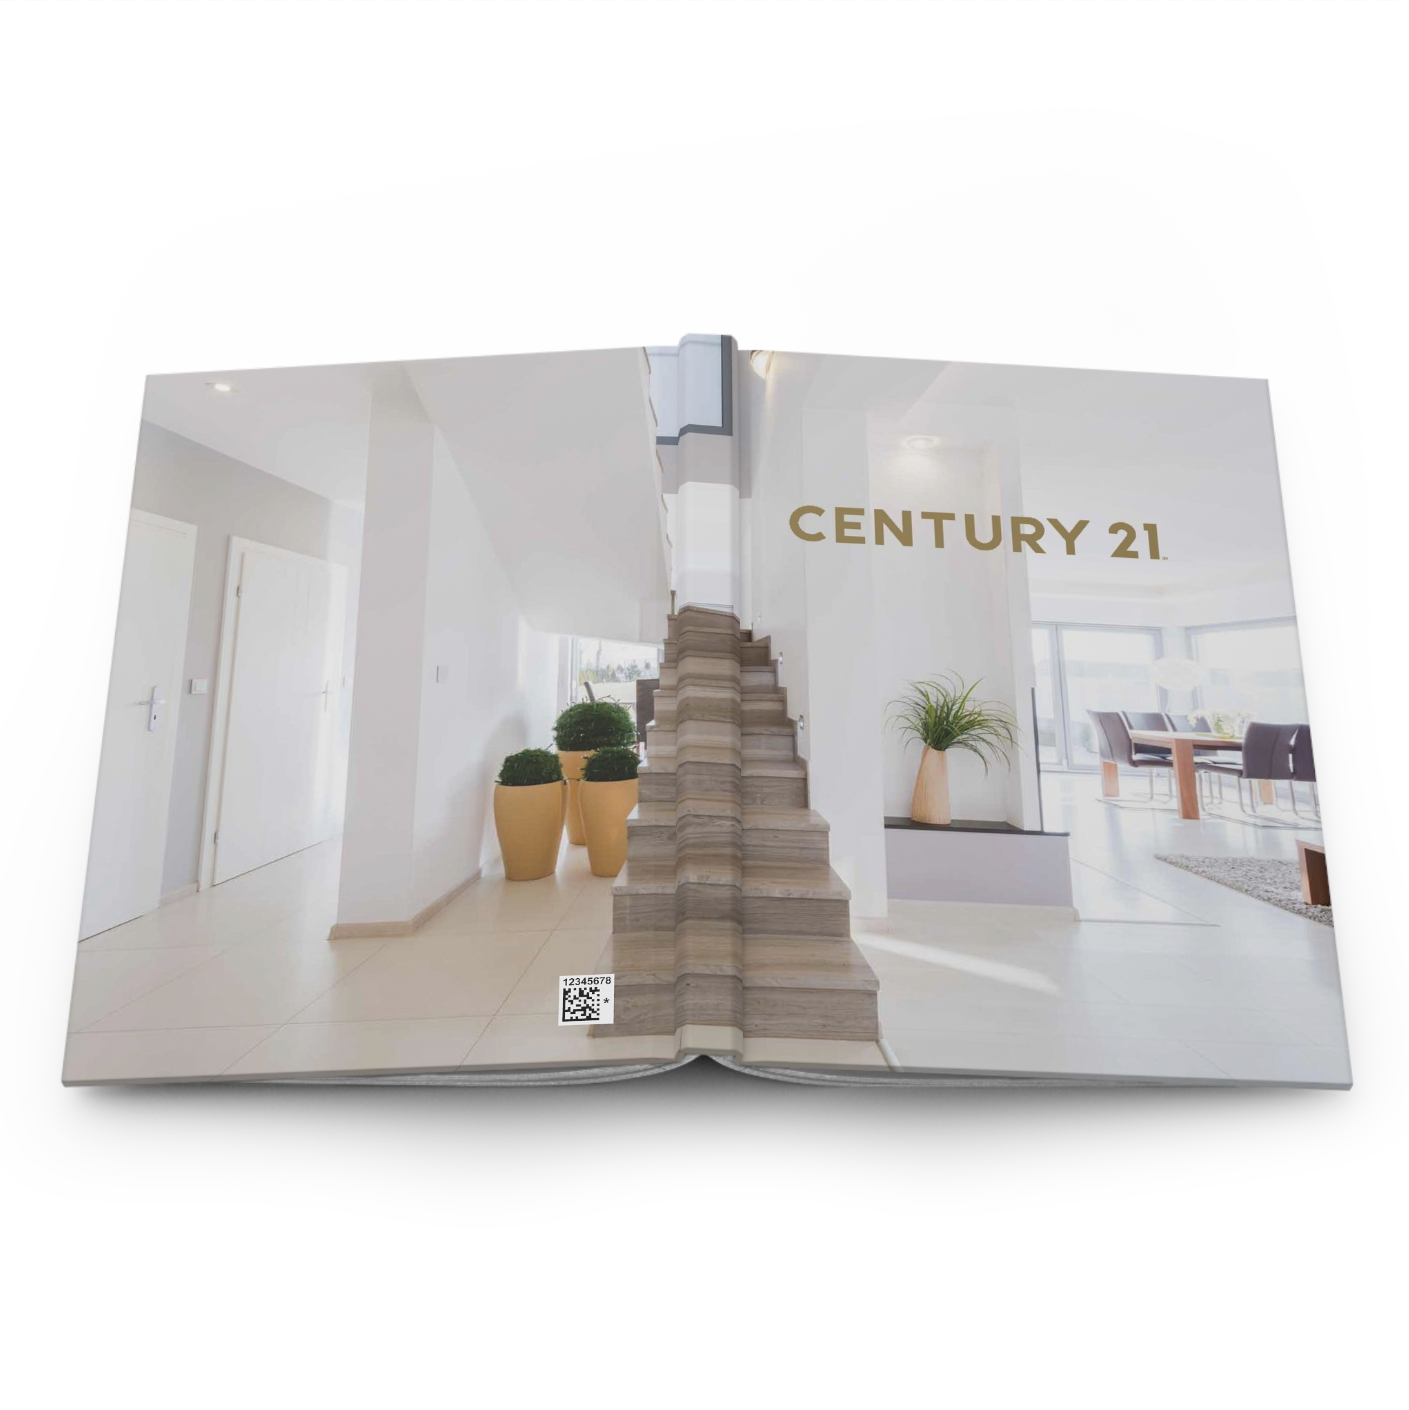 Century 21 Full Color Hardcover Binders Luxury Living (from as low as $10.46 per cover)